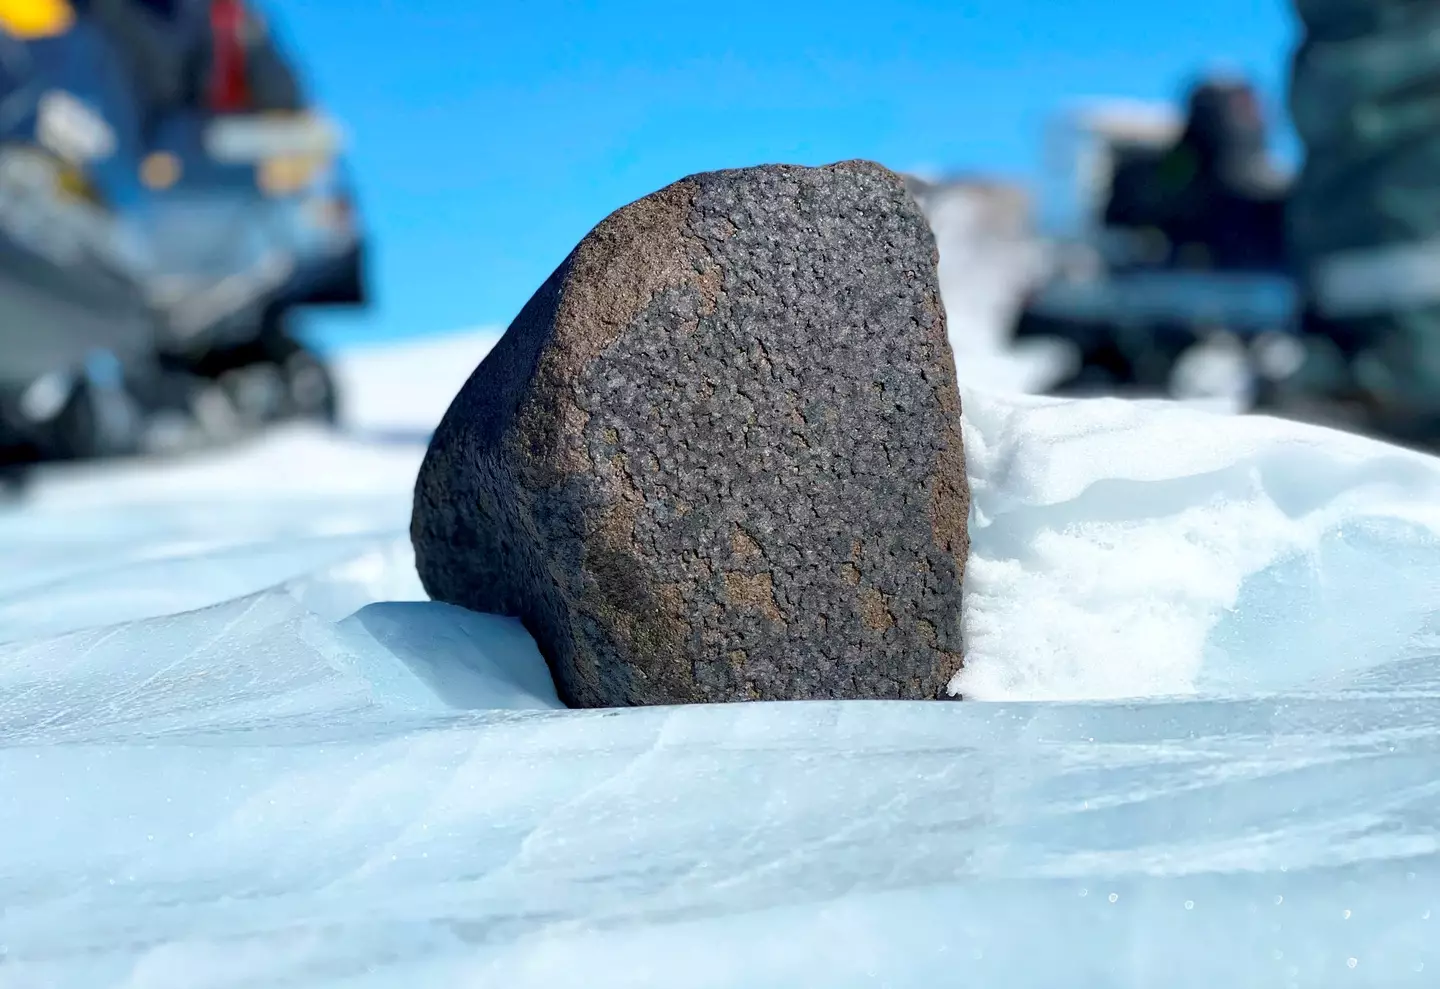 It's unusual to find a meteorite this size.